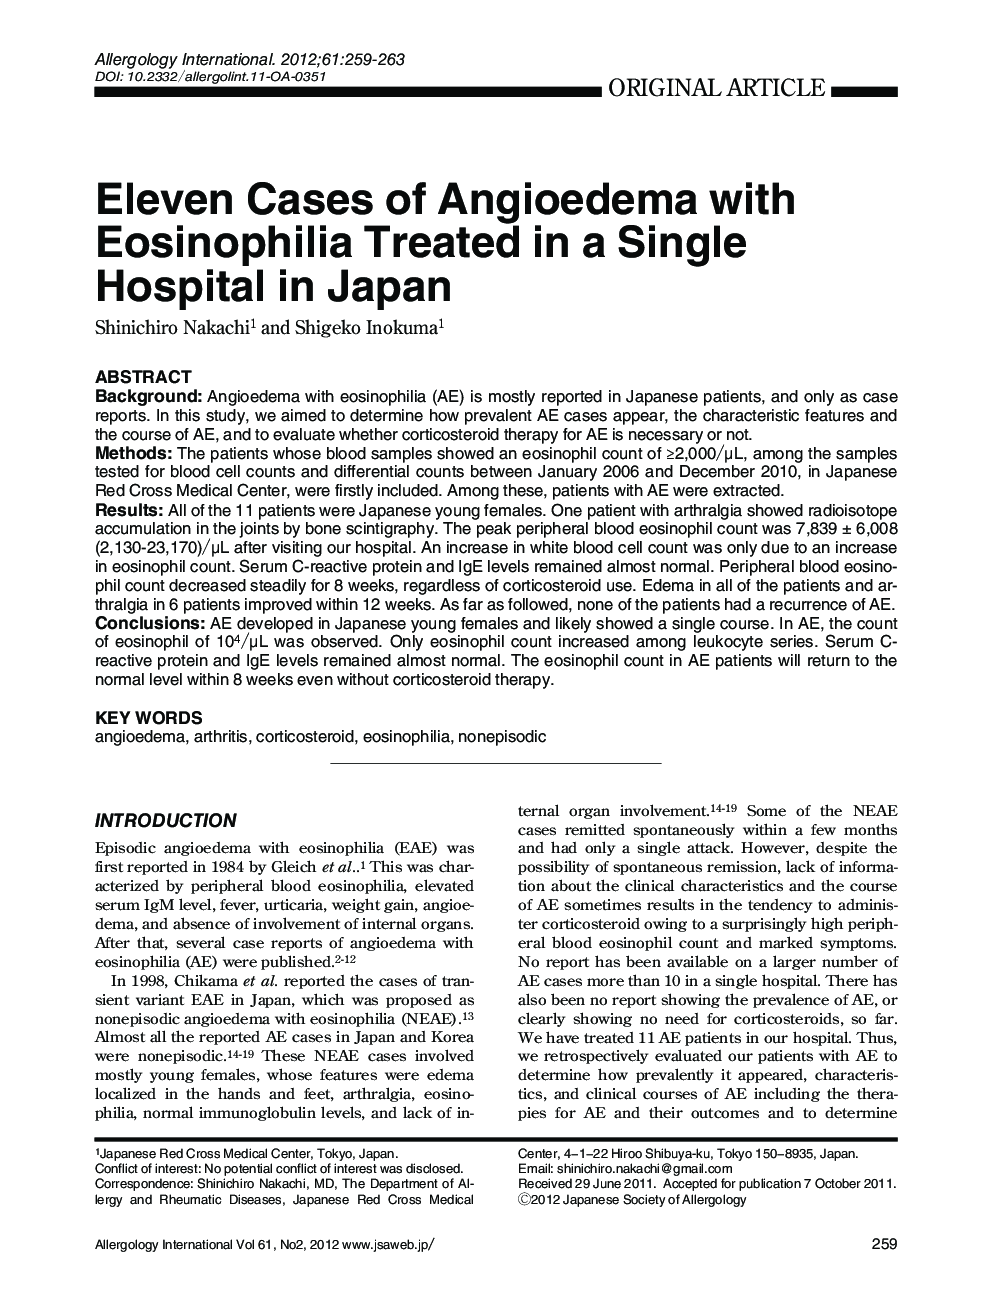 Eleven Cases of Angioedema with Eosinophilia Treated in a Single Hospital in Japan